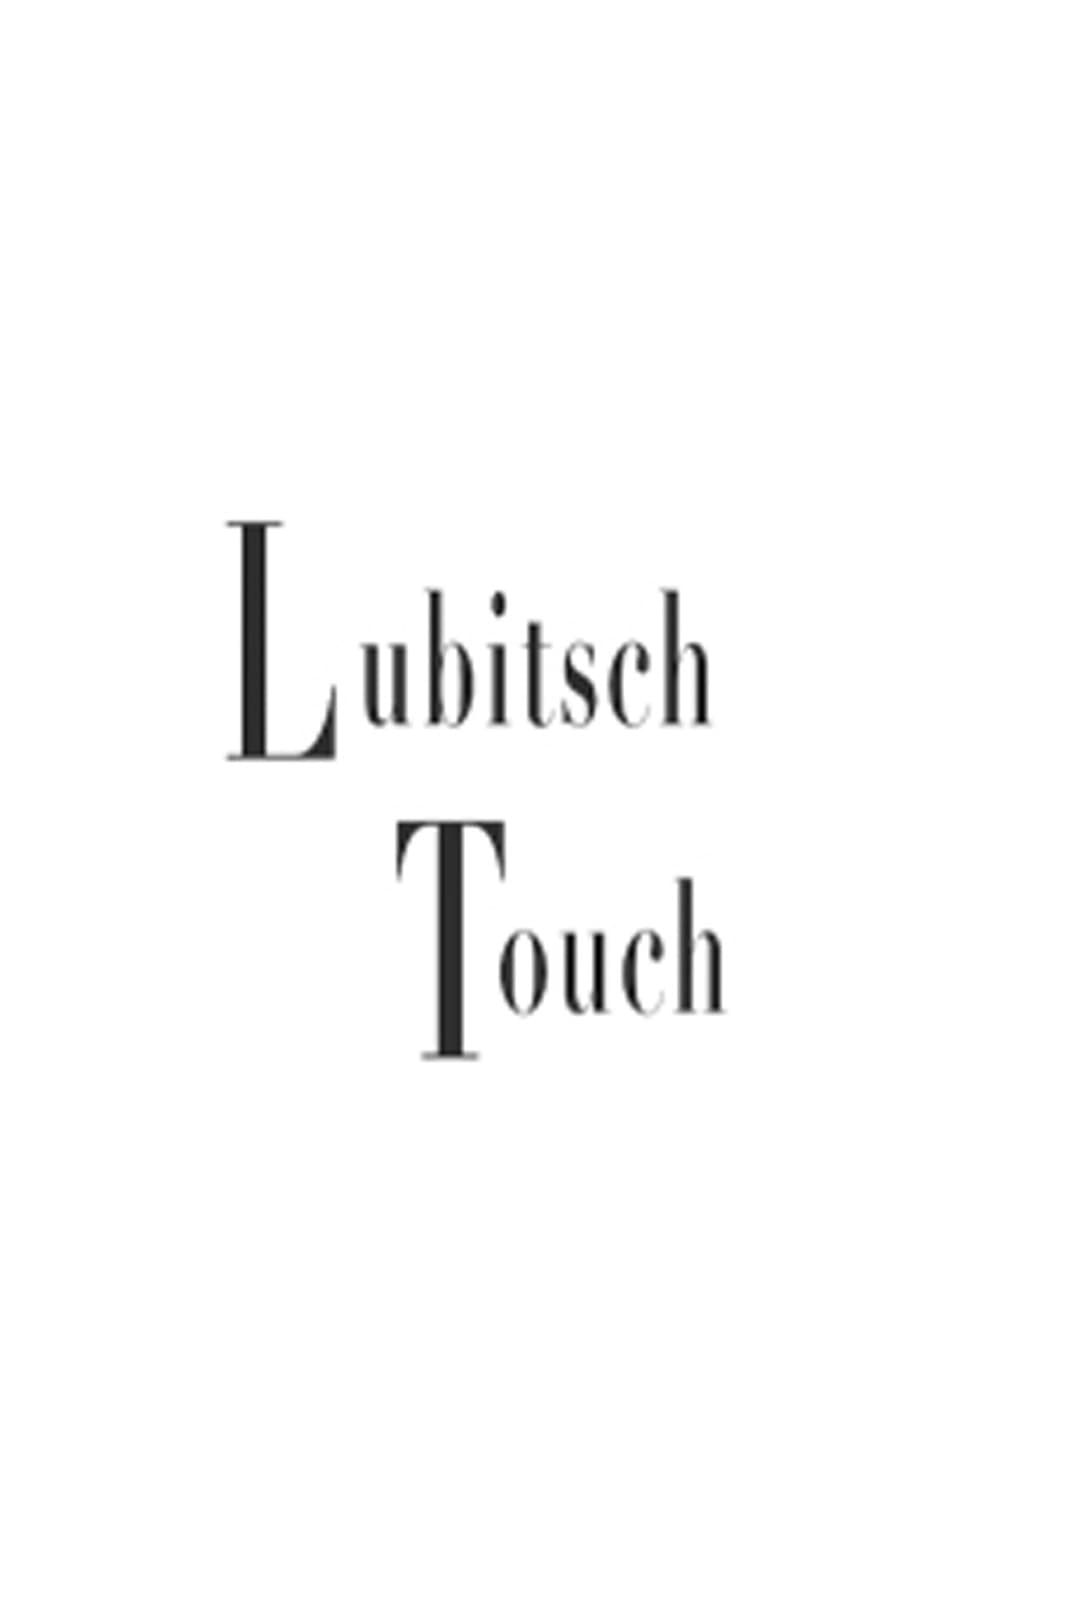 The Lubitsch Touch